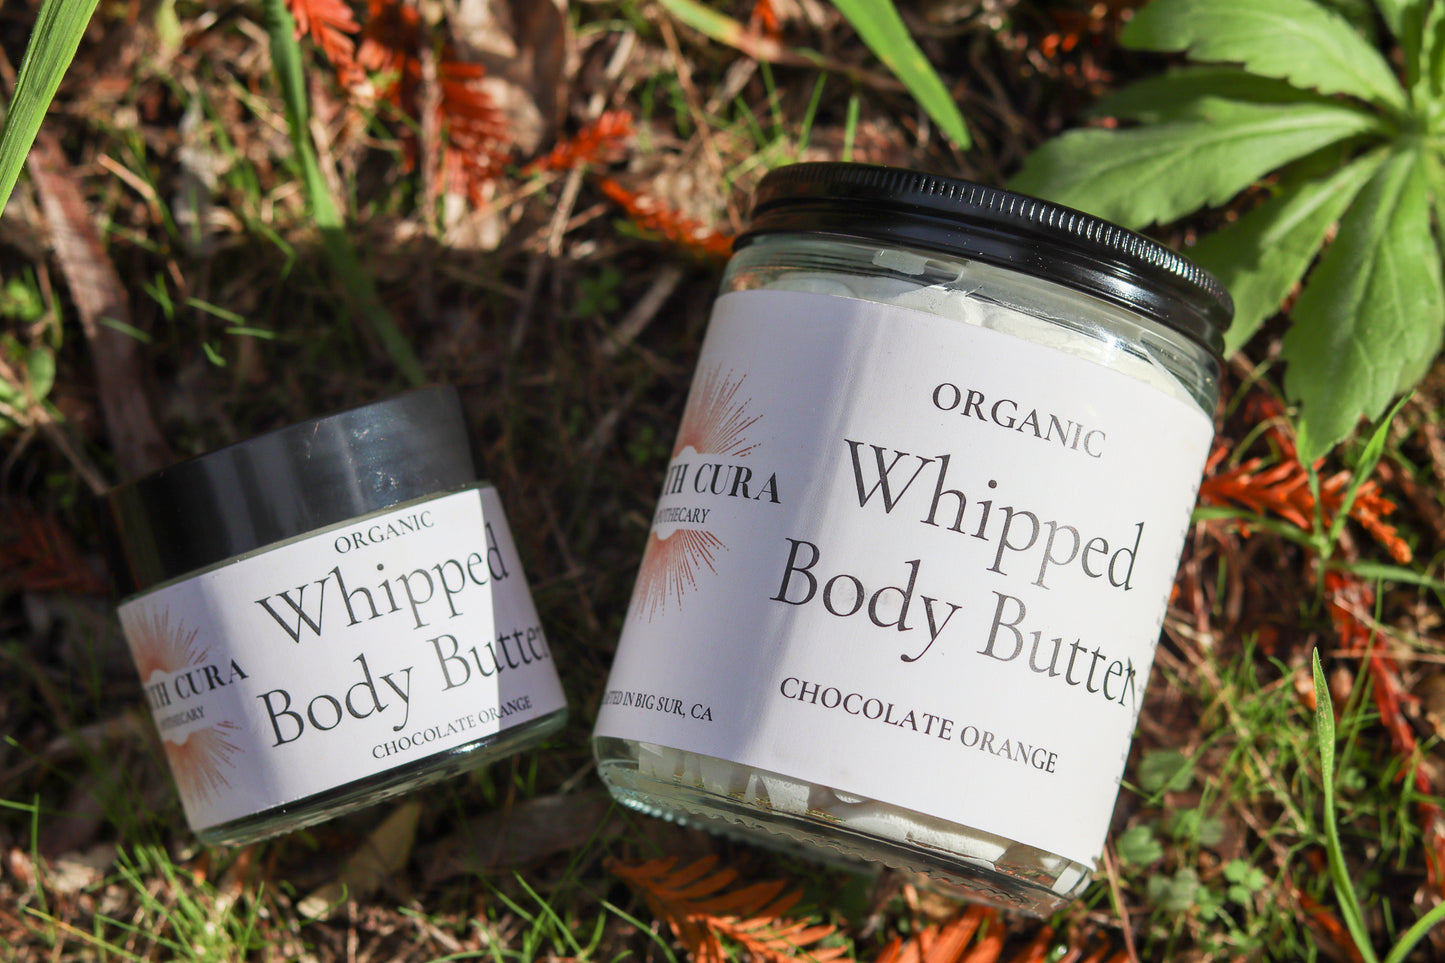 WHIPPED BODY BUTTER - Chocolate Orange - Organic, Non-greasy, Deeply Moisturizing